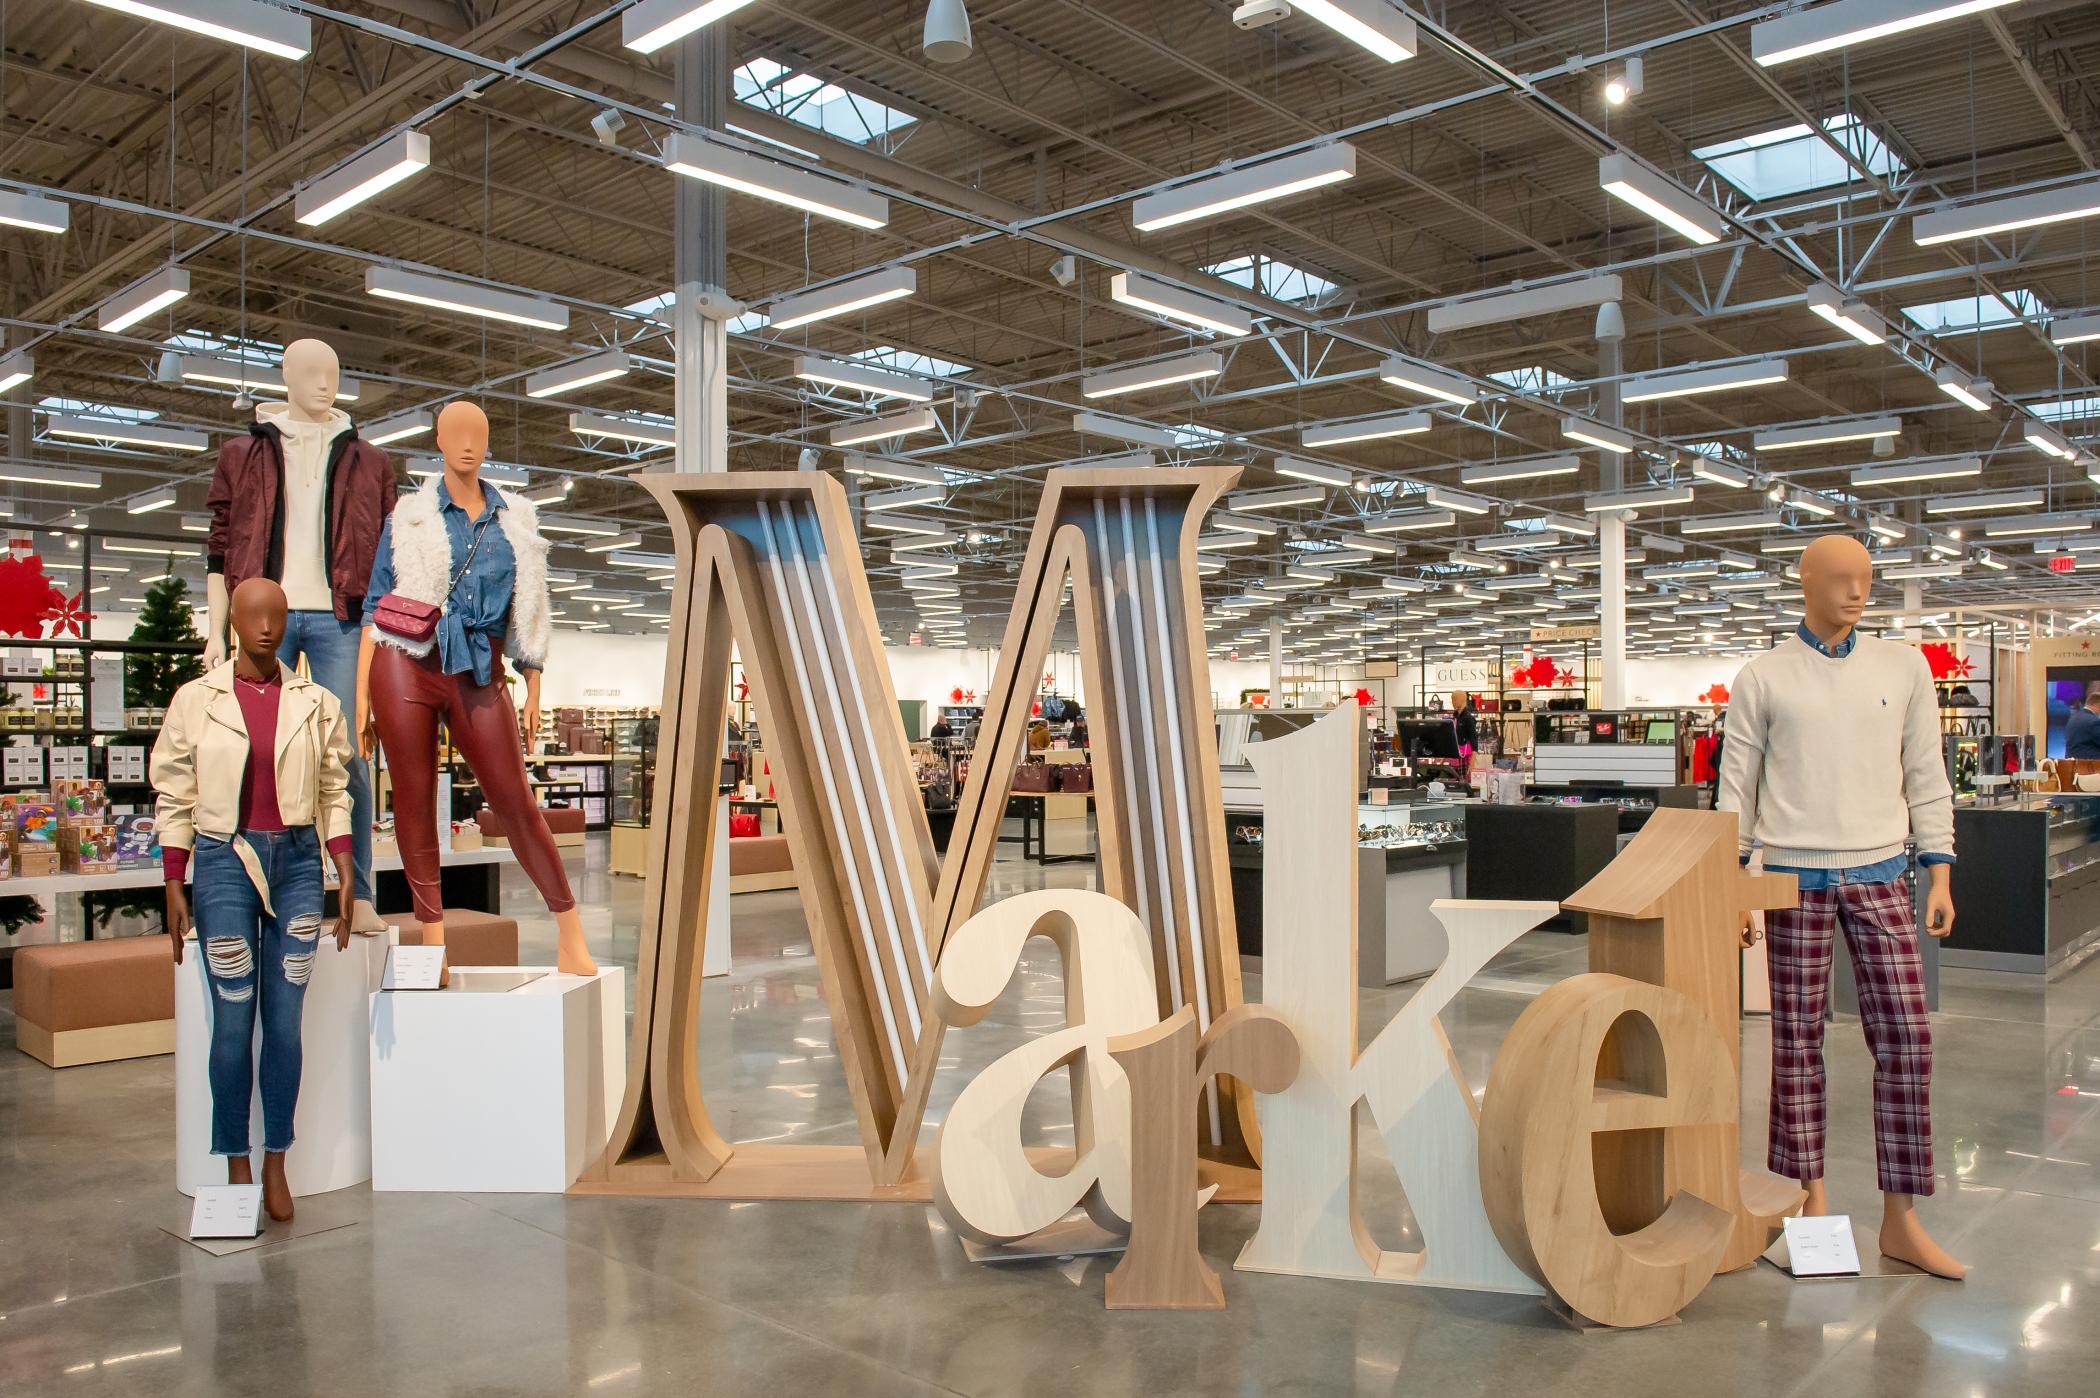 The Market by Macy's in South Point in Fort Worth, Texas, is one of eight locations now open. (Bita Honarvar/AP Images for Macy's)